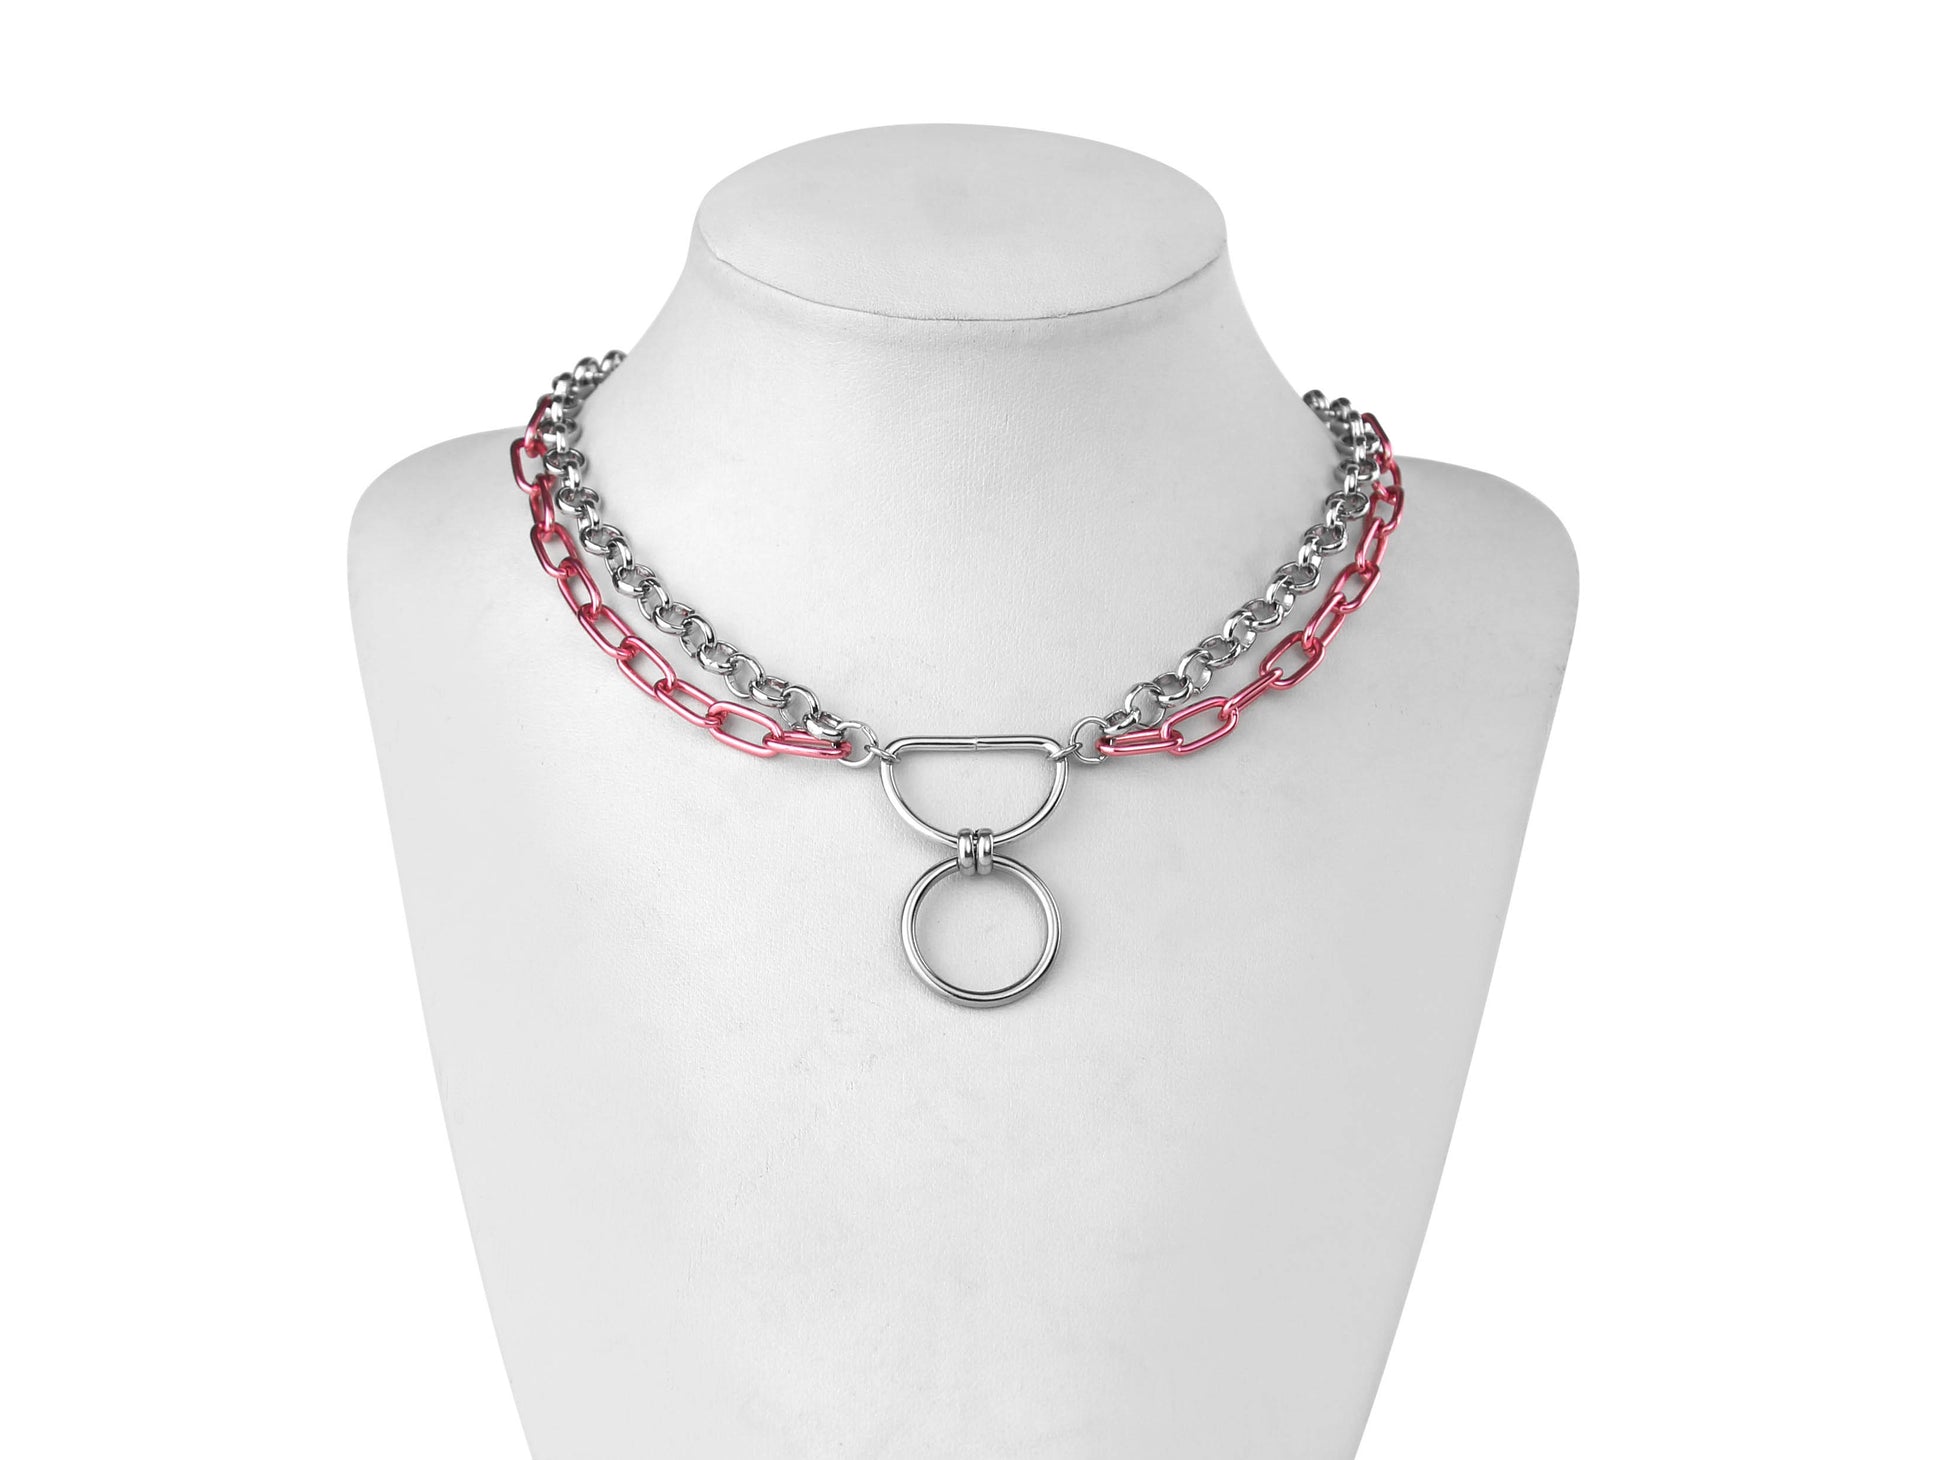 A Myril Jewels gothic punk necklace composed of alternating silver and vibrant pink chains features a prominent O-ring, exuding a mix of punk bravado and dark elegance. Ideal for Halloween adornment or daily wear, it's a statement piece for those with a taste for neo-gothic flair and avant-garde style.